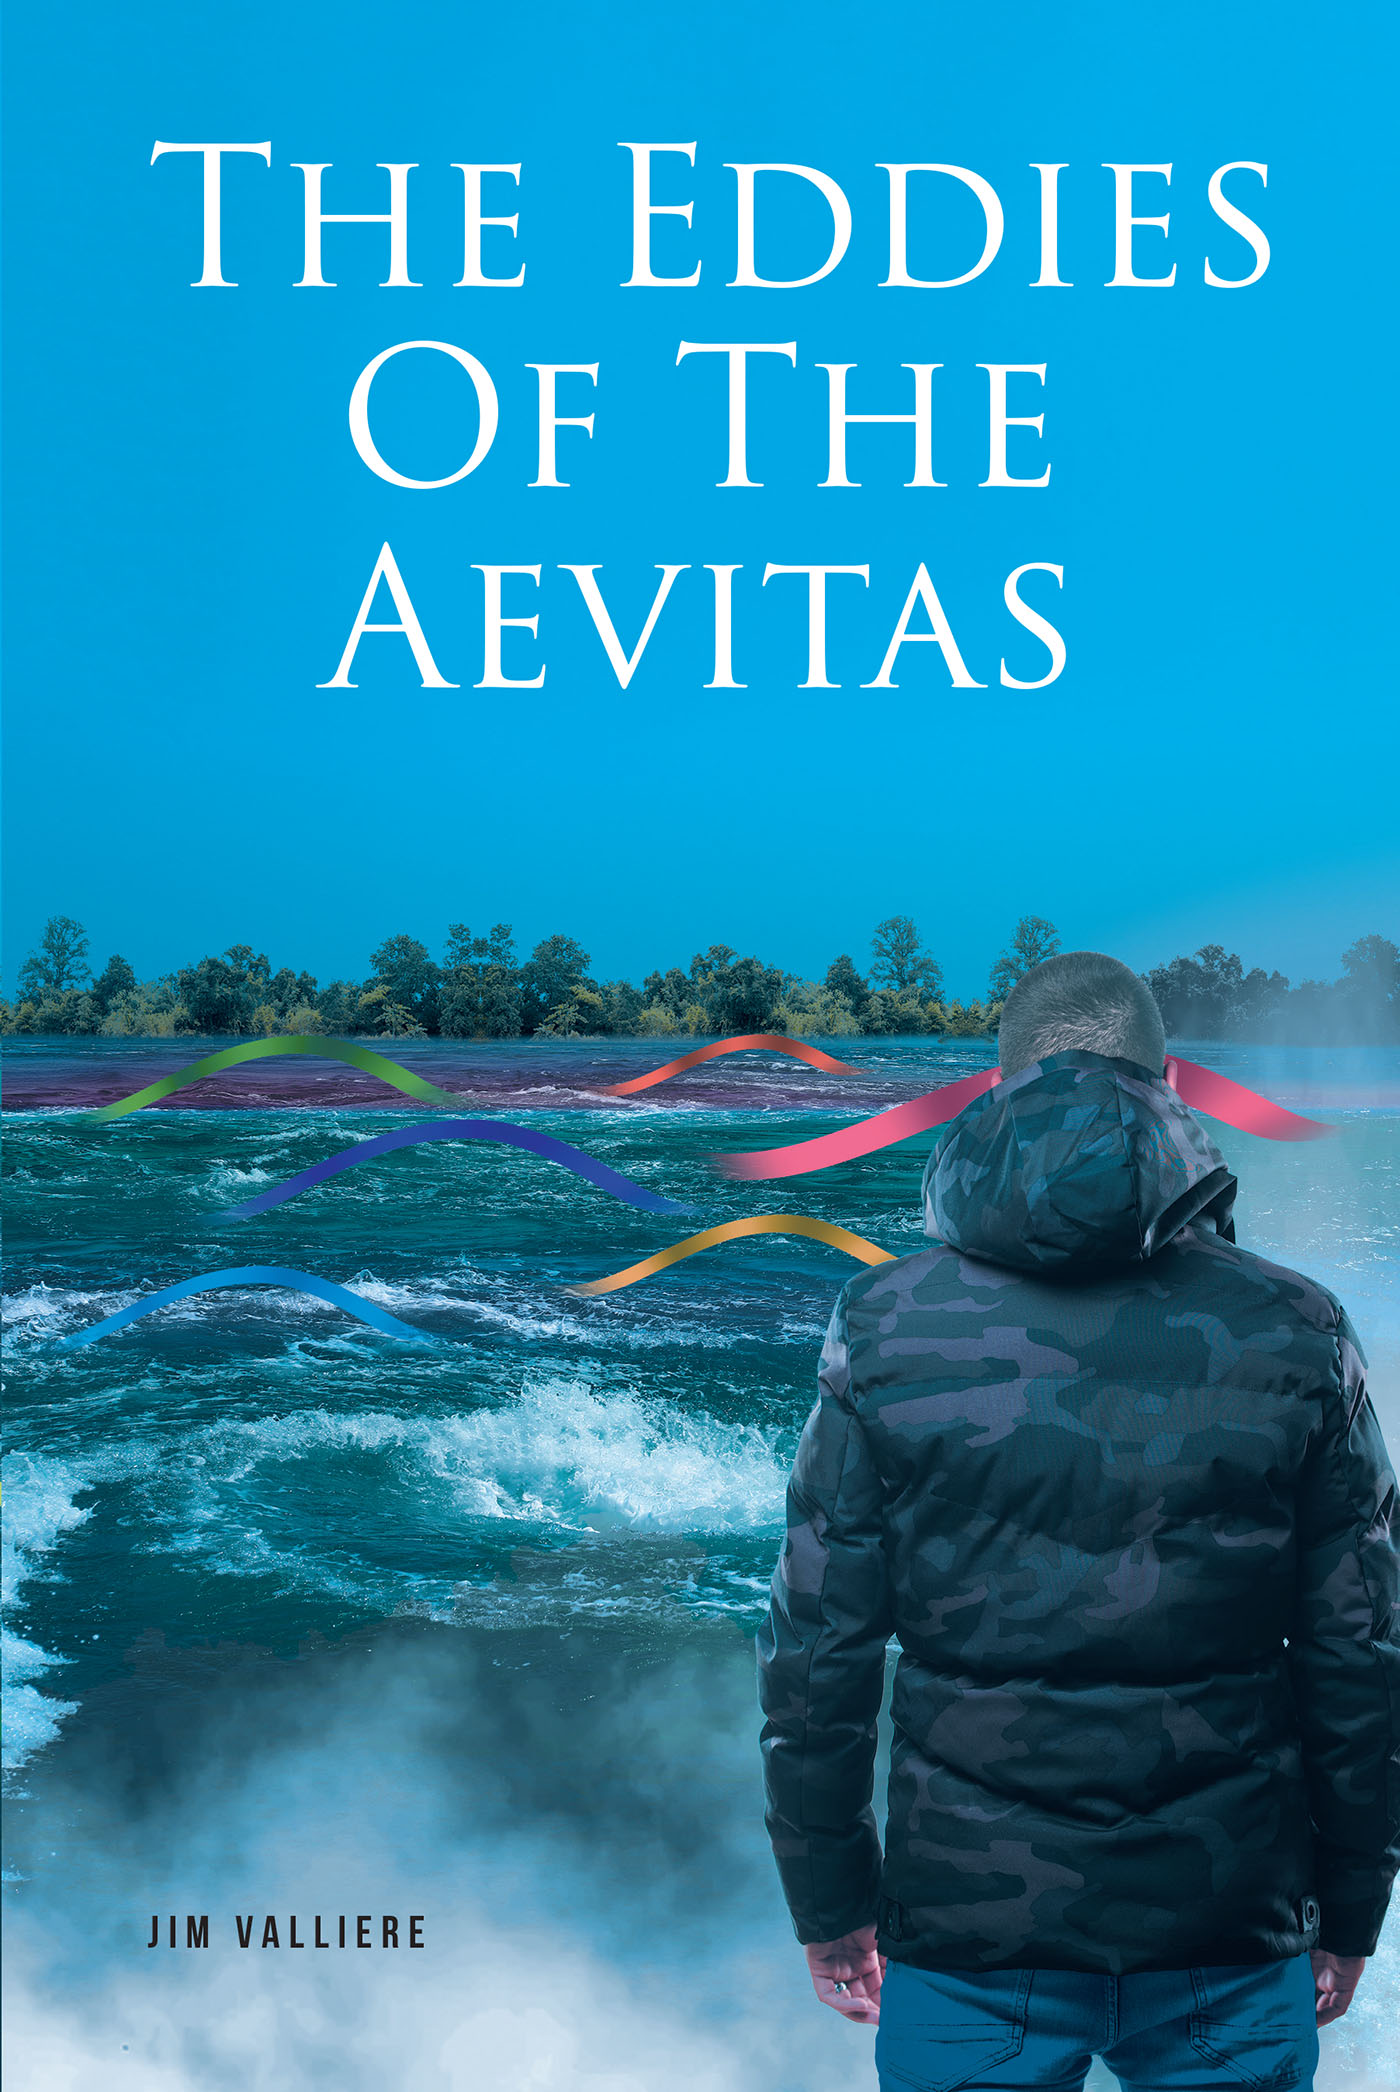 Jim Valliere’s New Book, “The Eddies of the Aevitas,” Follows a Man Who is Swept Up Into a Journey Across Time That Holds the Key to the Ultimate Truths and His Future